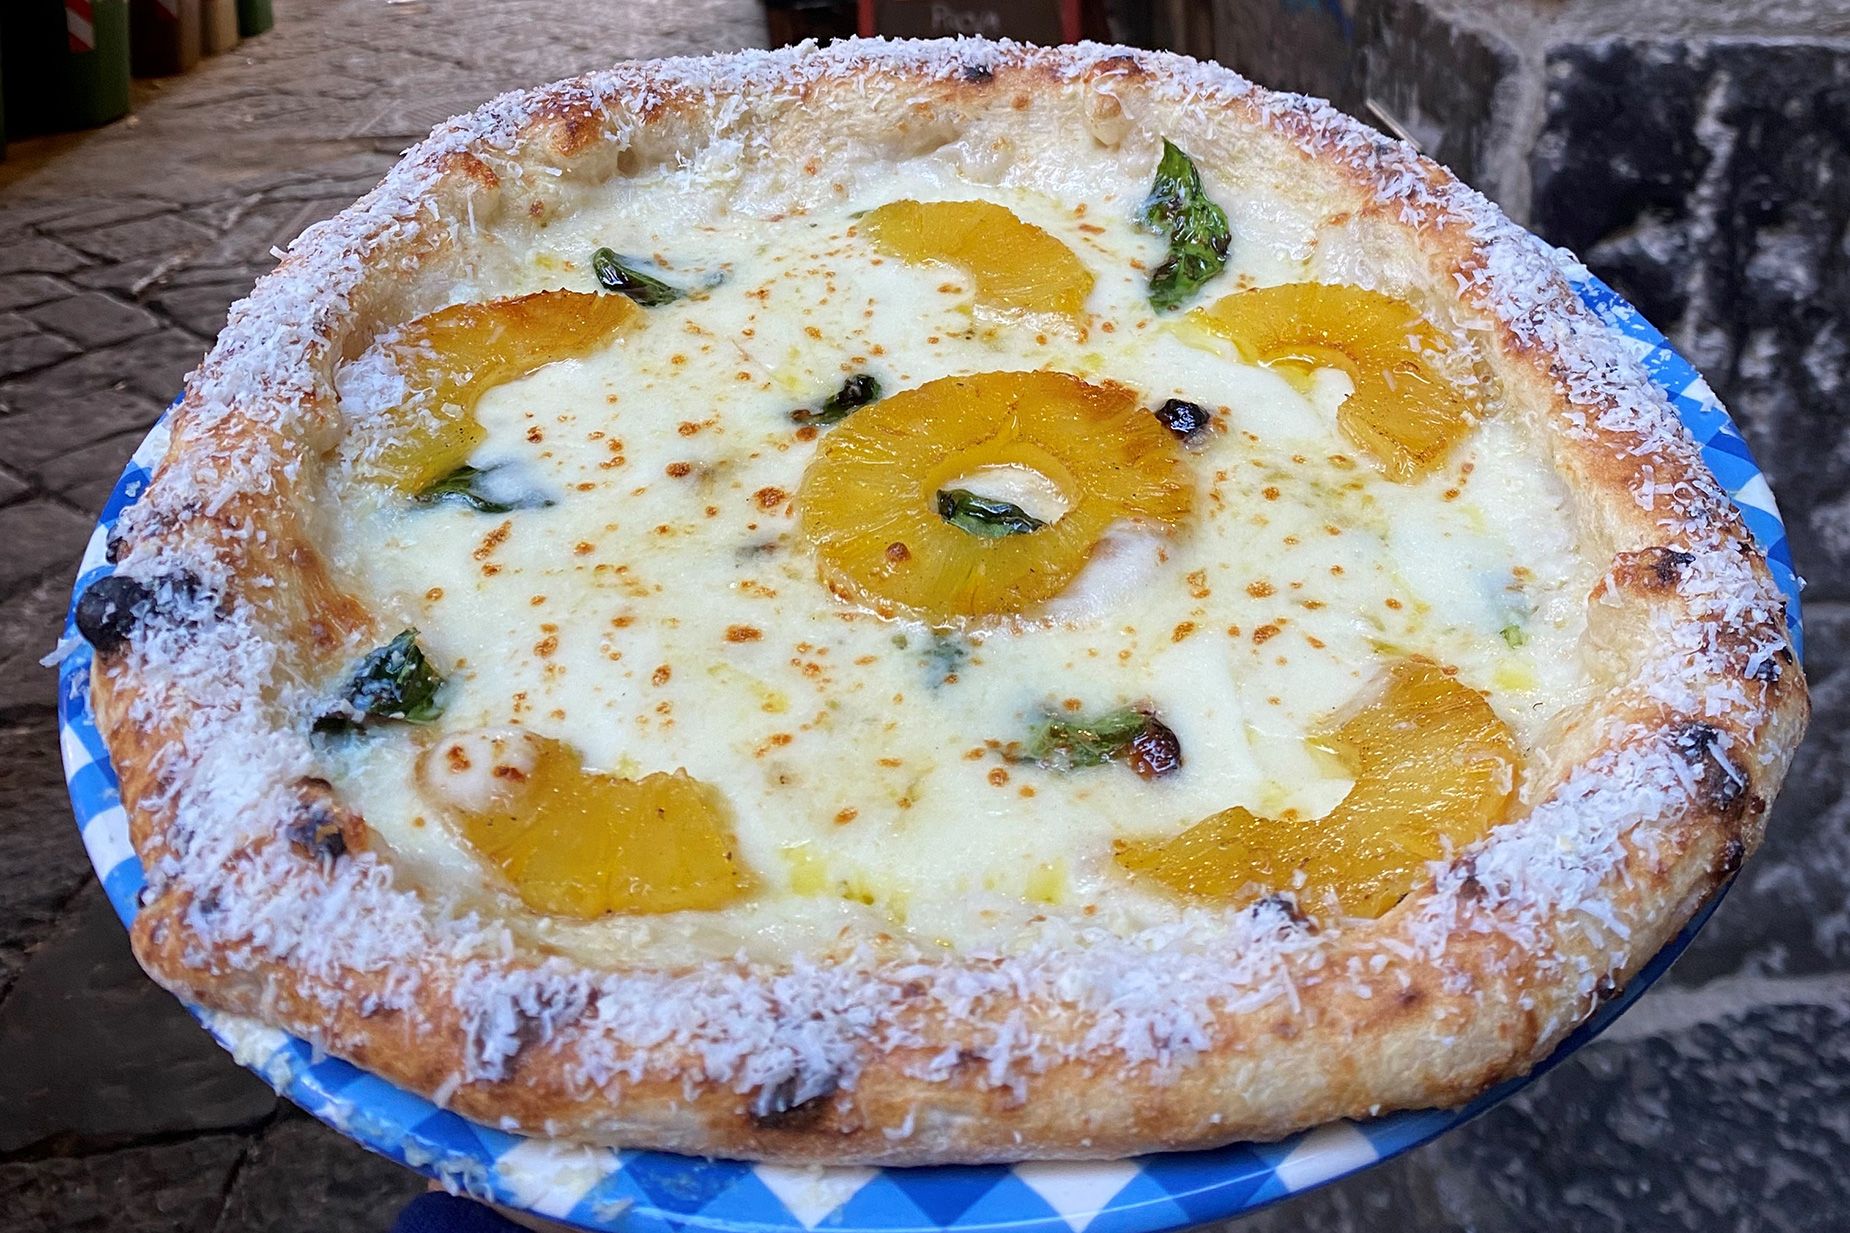 Pineapple pizza in Italy....